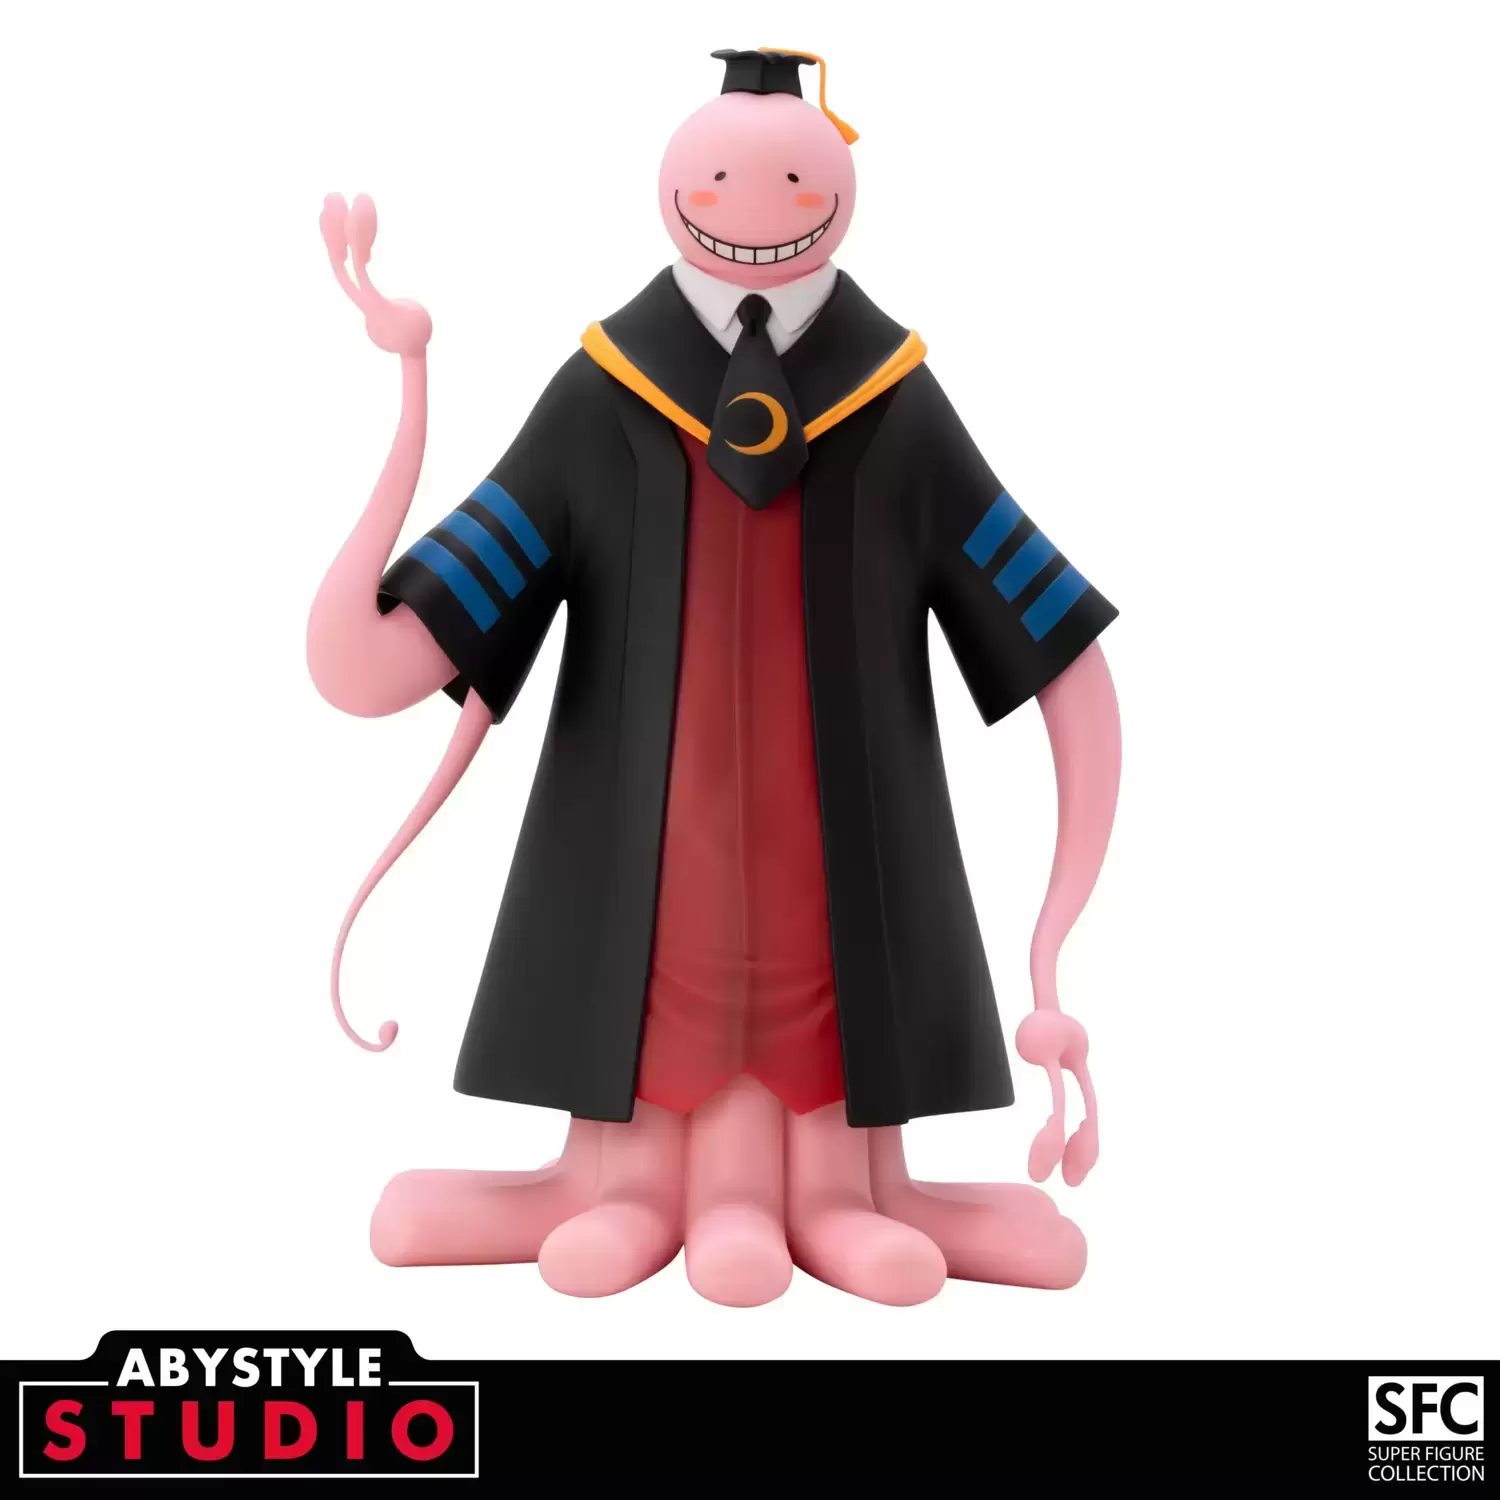 SFC - Super Figure Collection by AbyStyle Studio - Assassination Classroom - Koro Sensei (Pink)